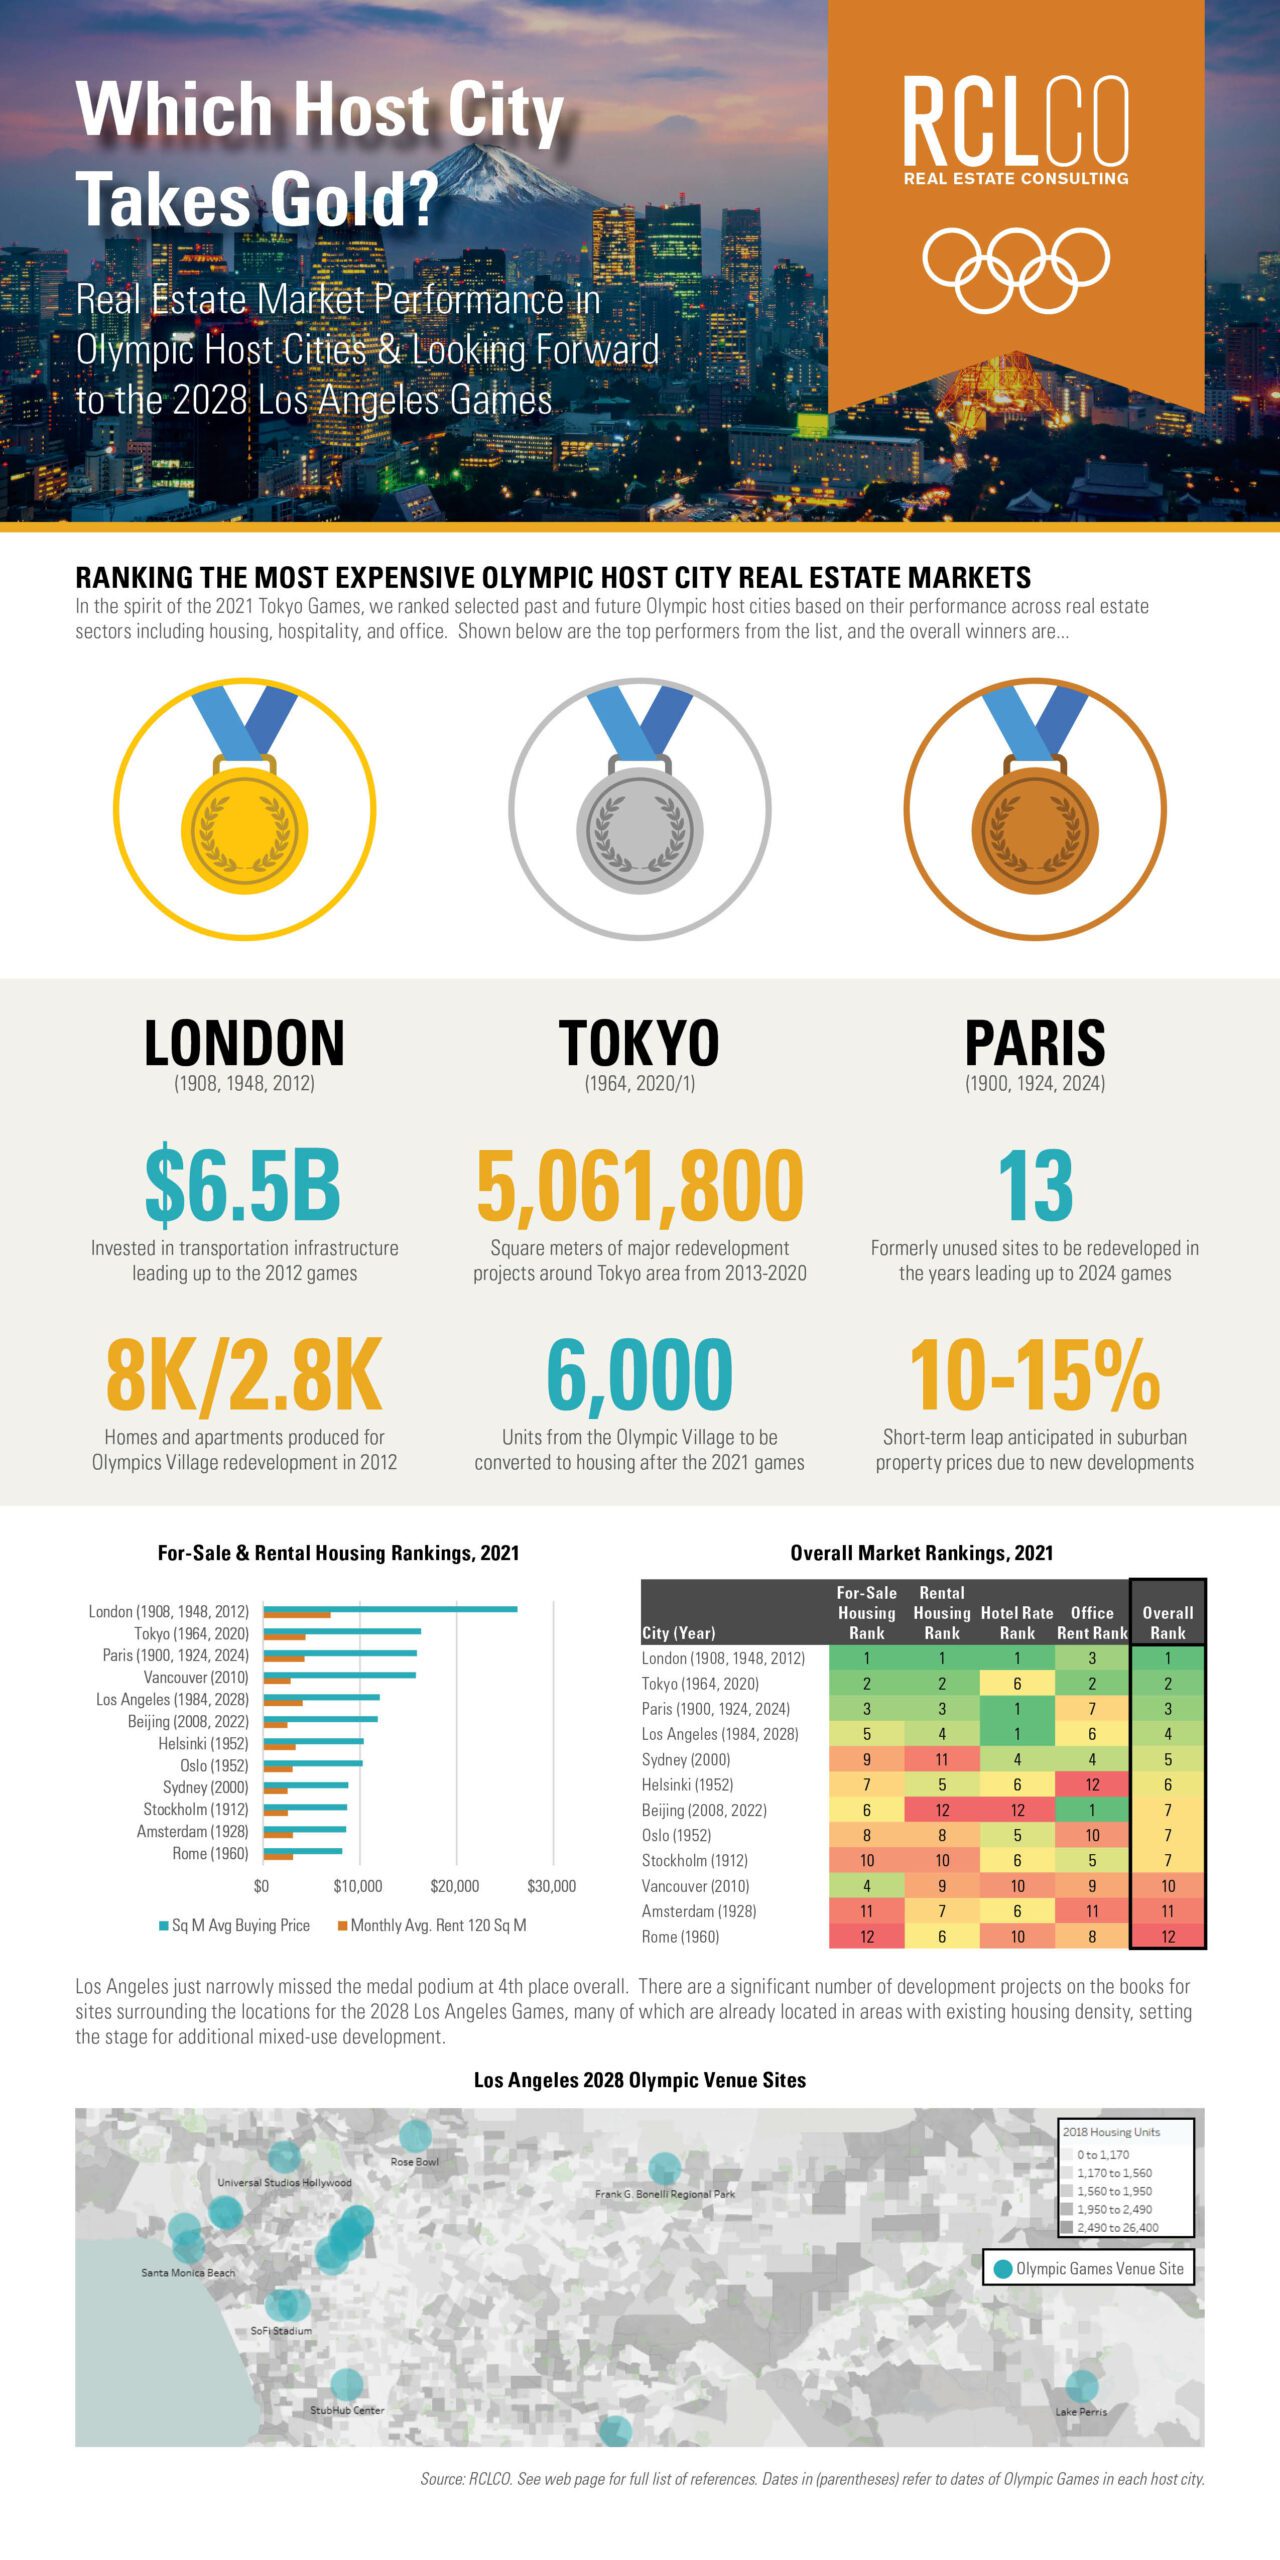 London, Tokyo, and Paris are the top 3 real estate markets of Olympic host cities based on RCLCO's market ranking